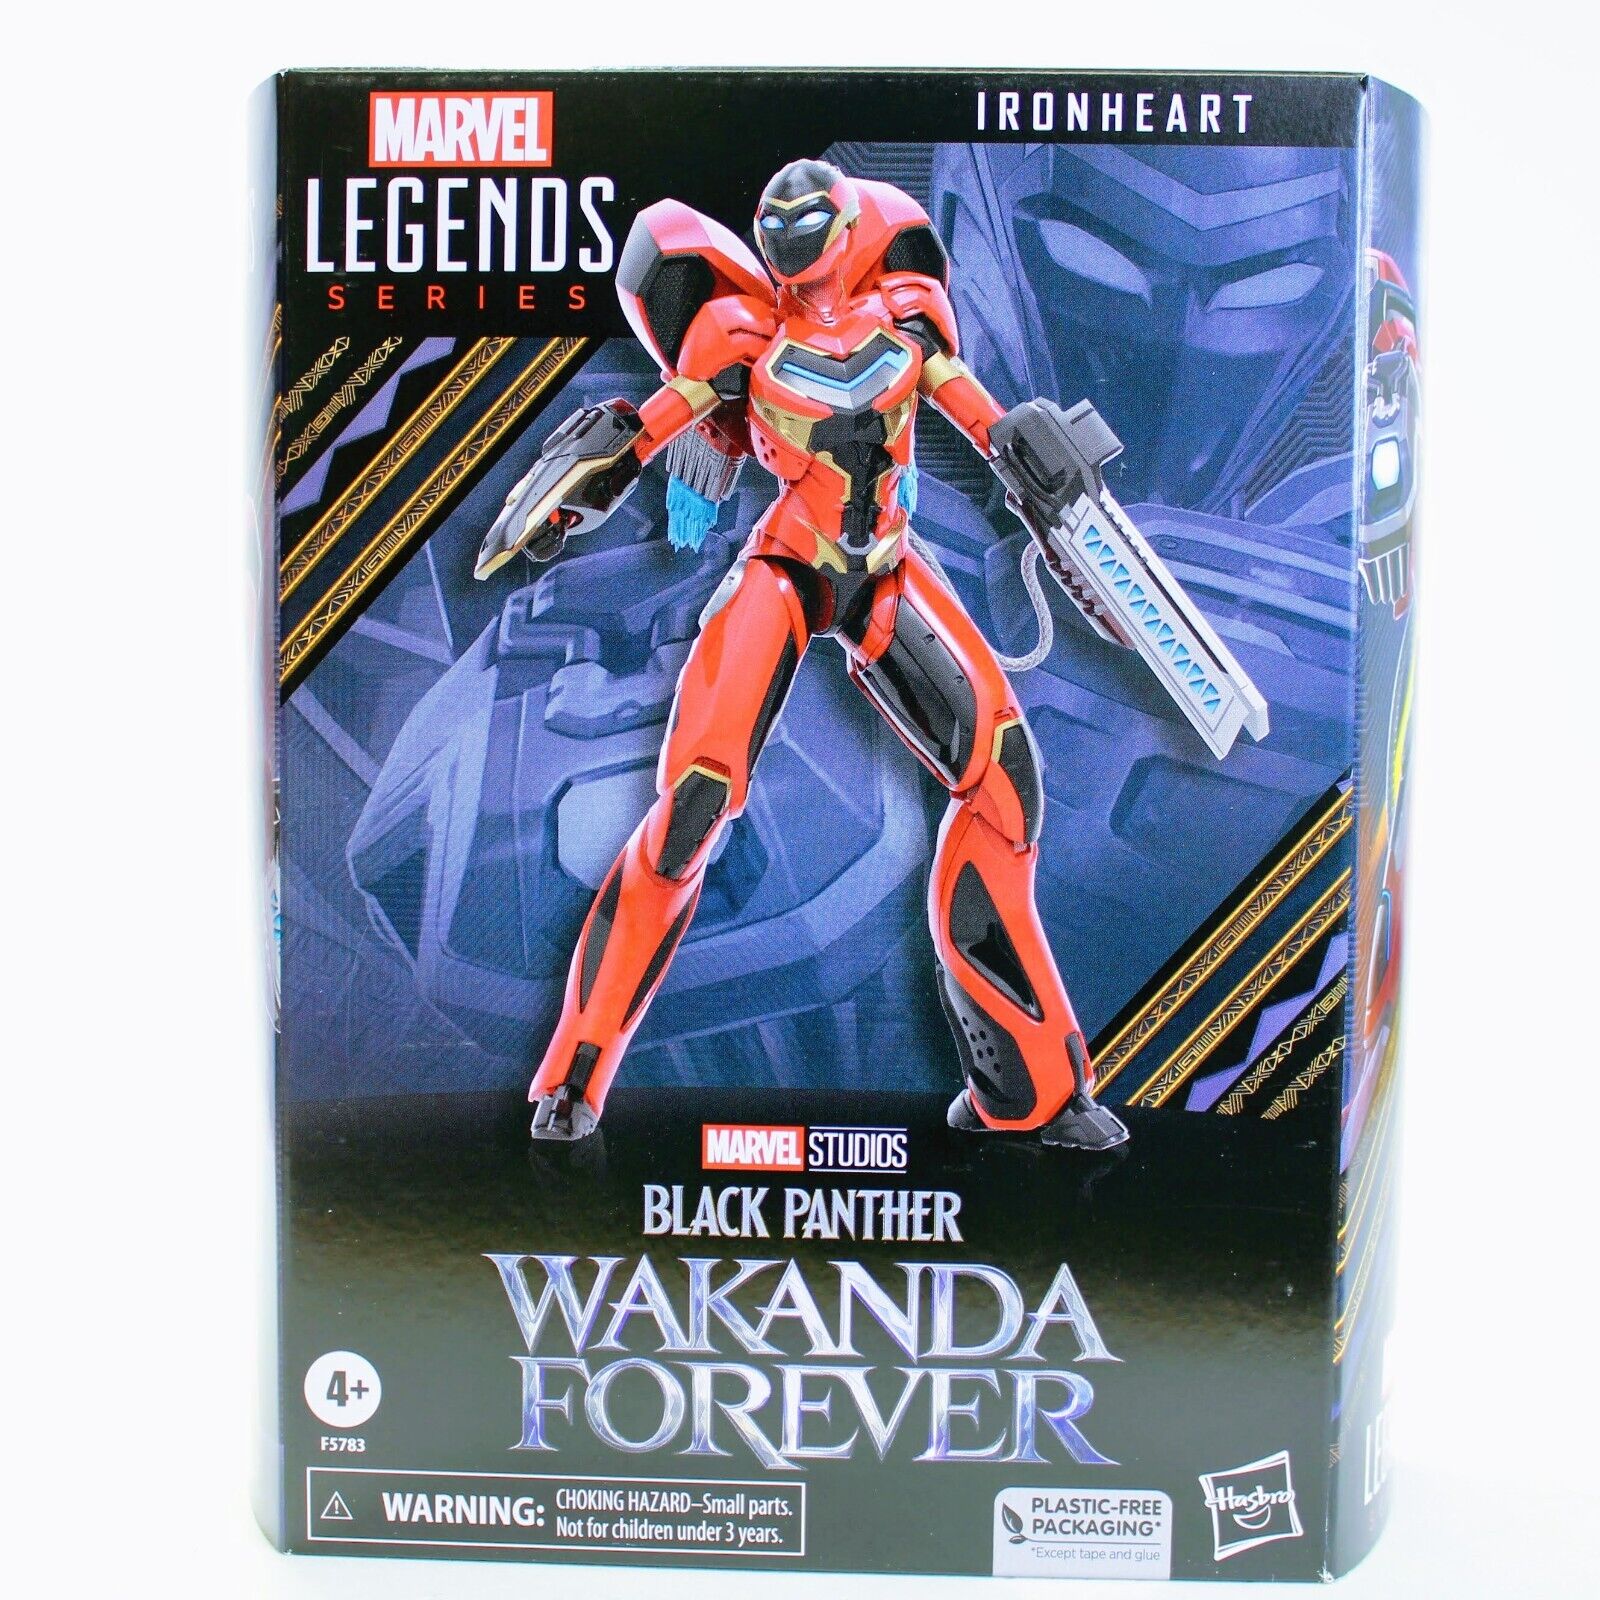 Marvel Legends Deluxe Ironheart - Black Panther Wakanda Forever 6" Action Figure